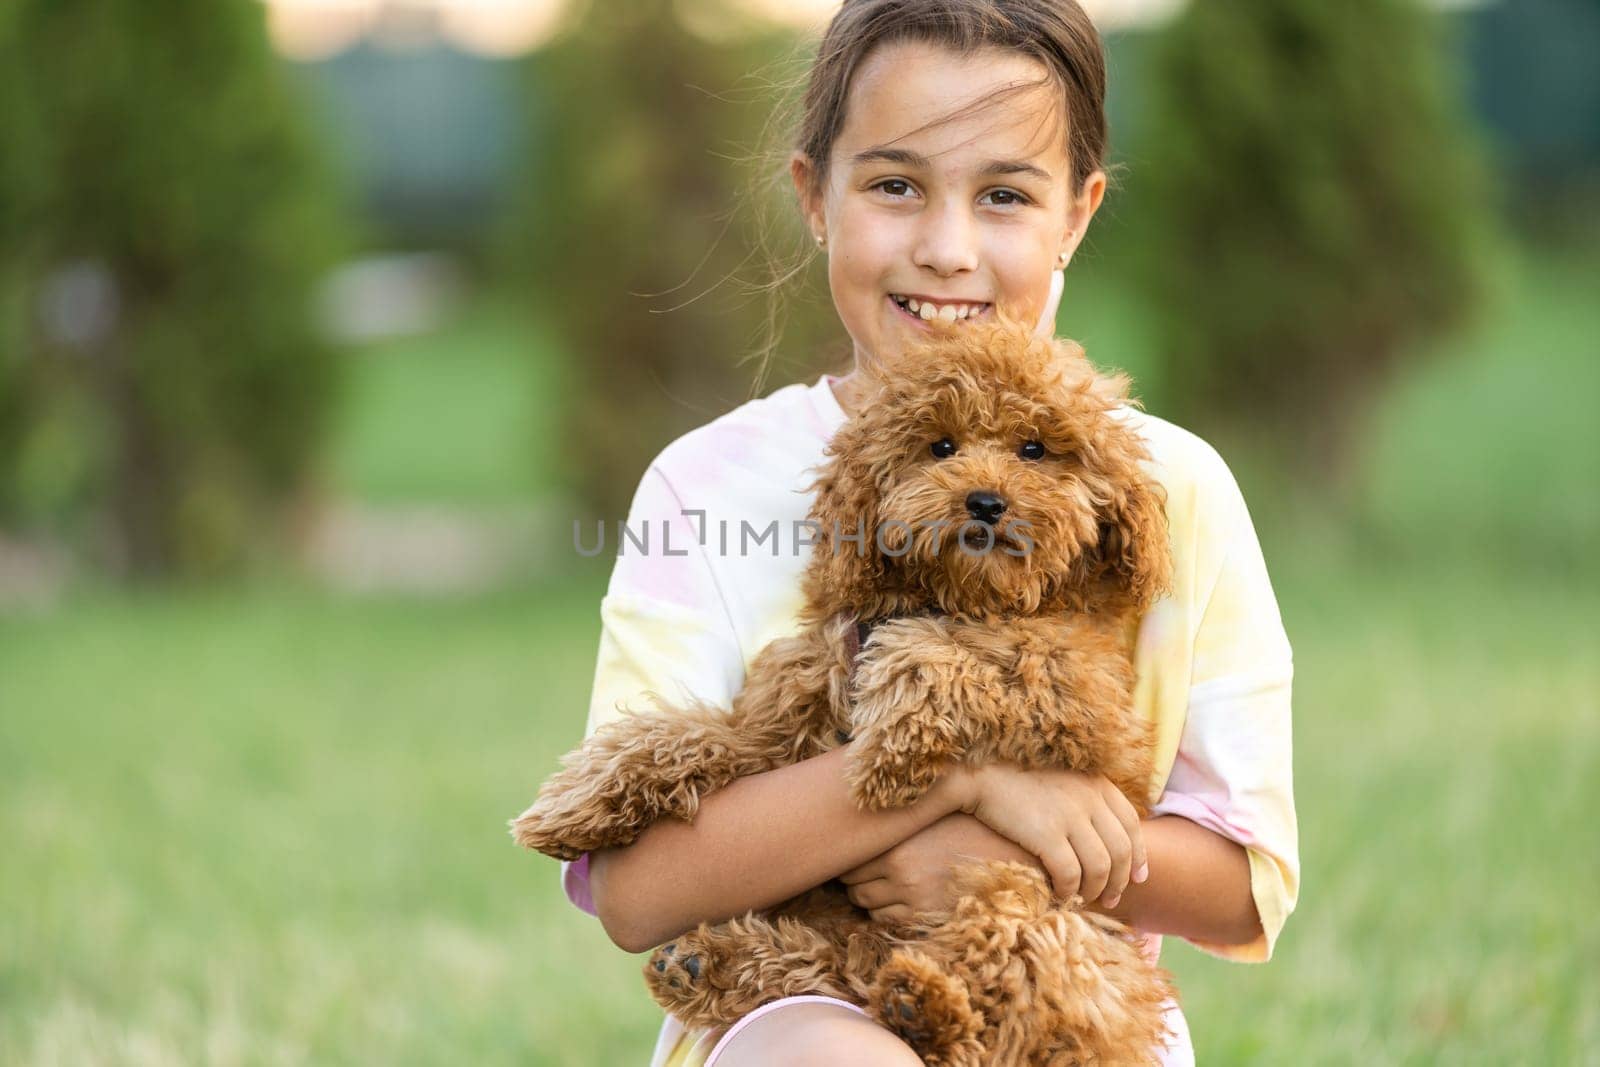 a little girl playing with her maltipoo dog a maltese-poodle breed.